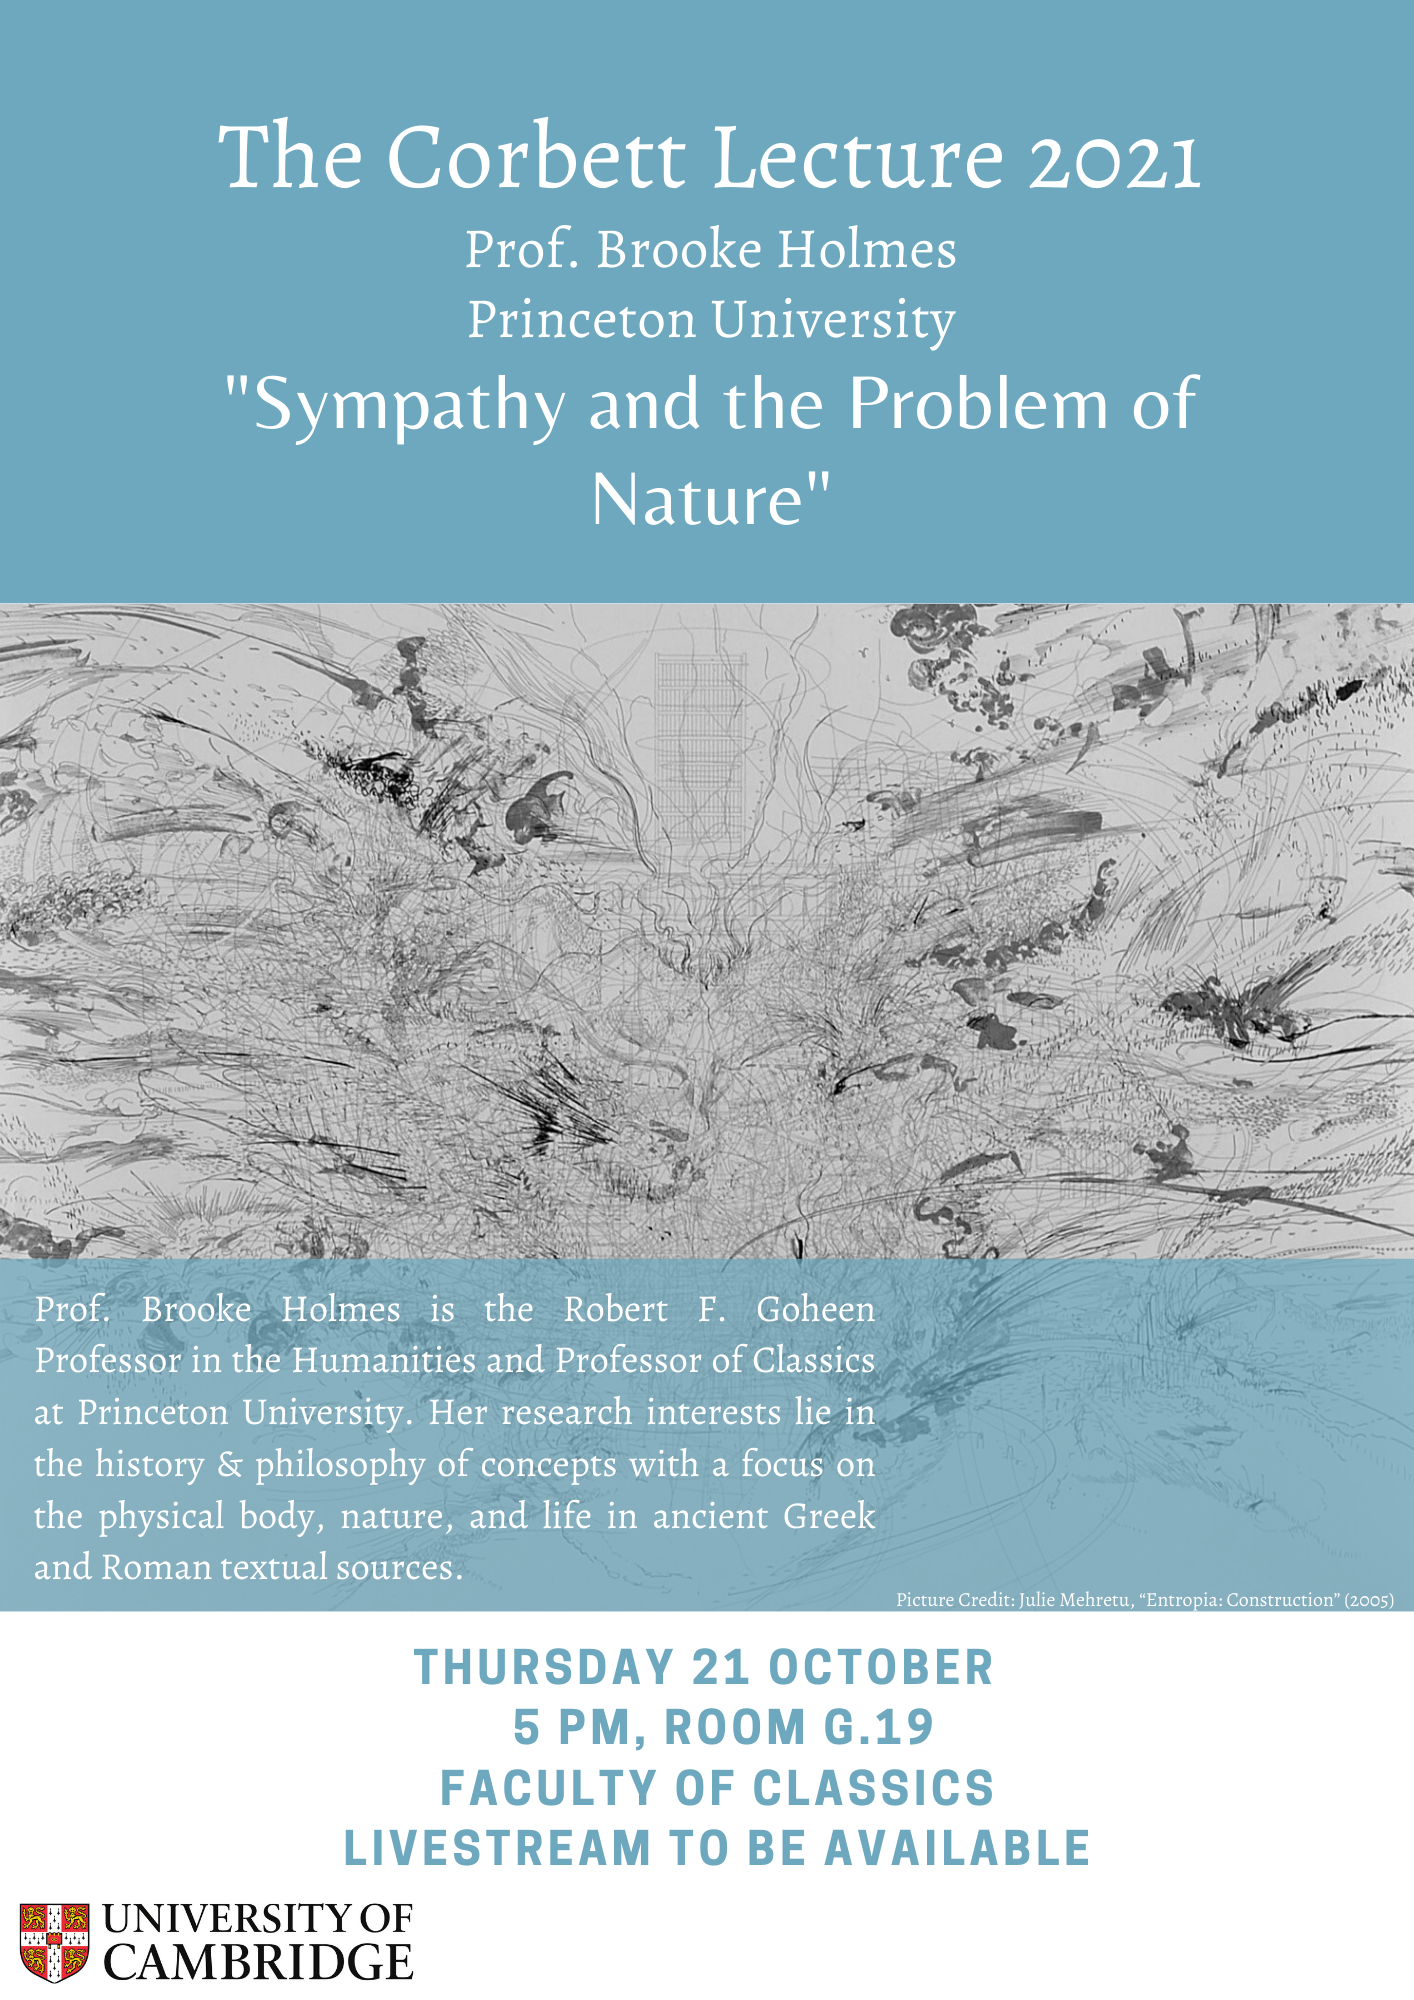 The Corbett Lecture 2021 - Prof. Brooke Holmes, Princeton University, "Sympathy and the Problem of Nature". Thursday 21st Octoberm 5pm, Room G.19, Faculty of Classics. Livestream to be available.